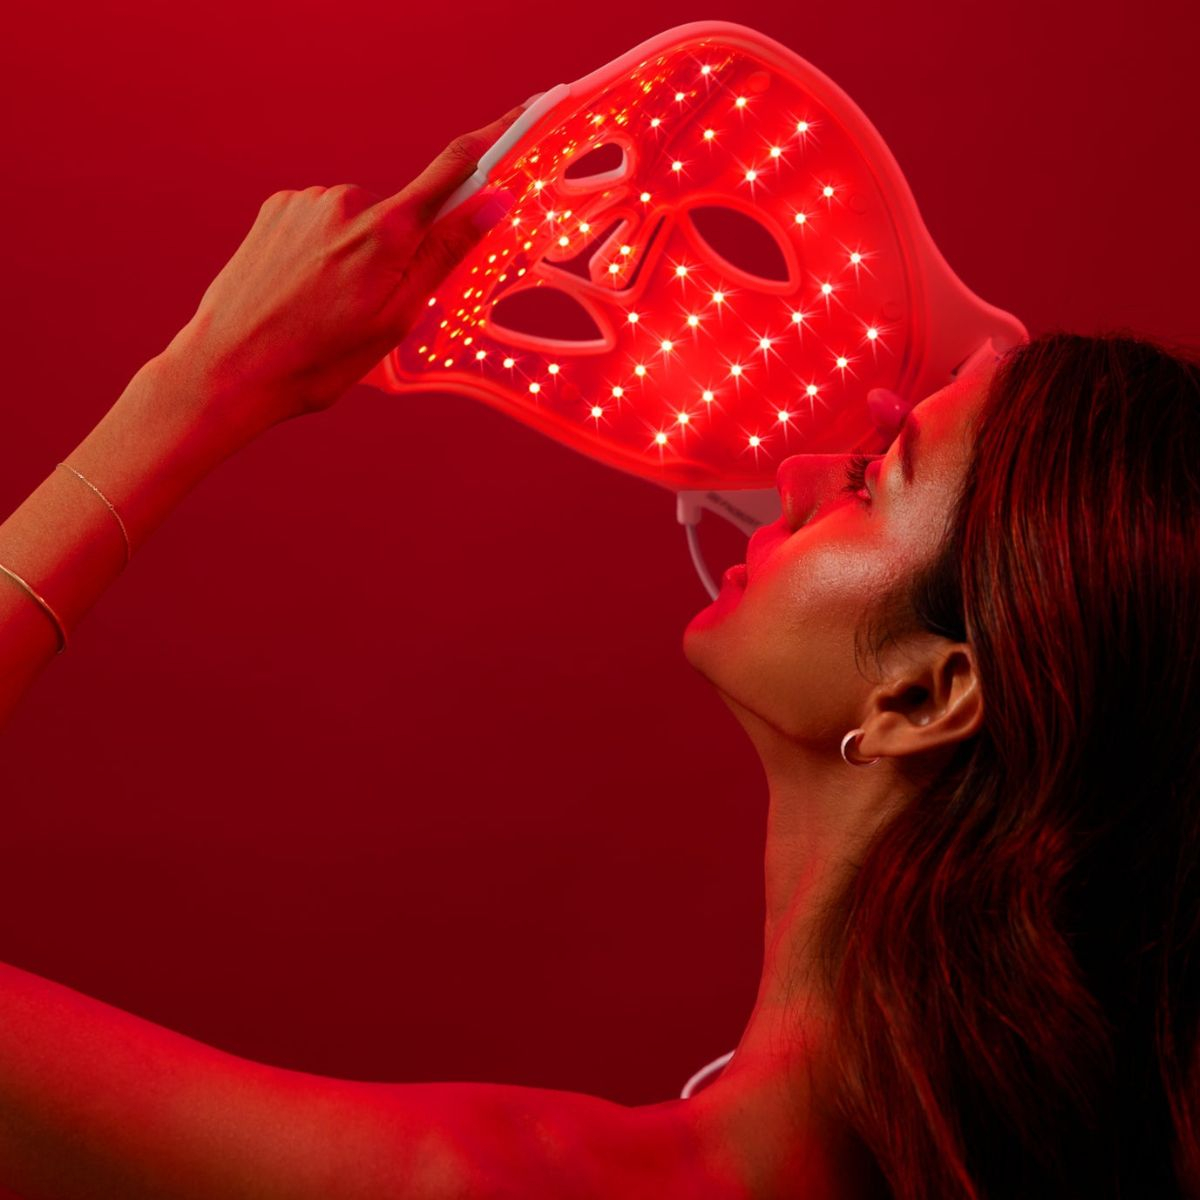 How to Reduce Wrinkles with Red Light Therapy, According to an Expert